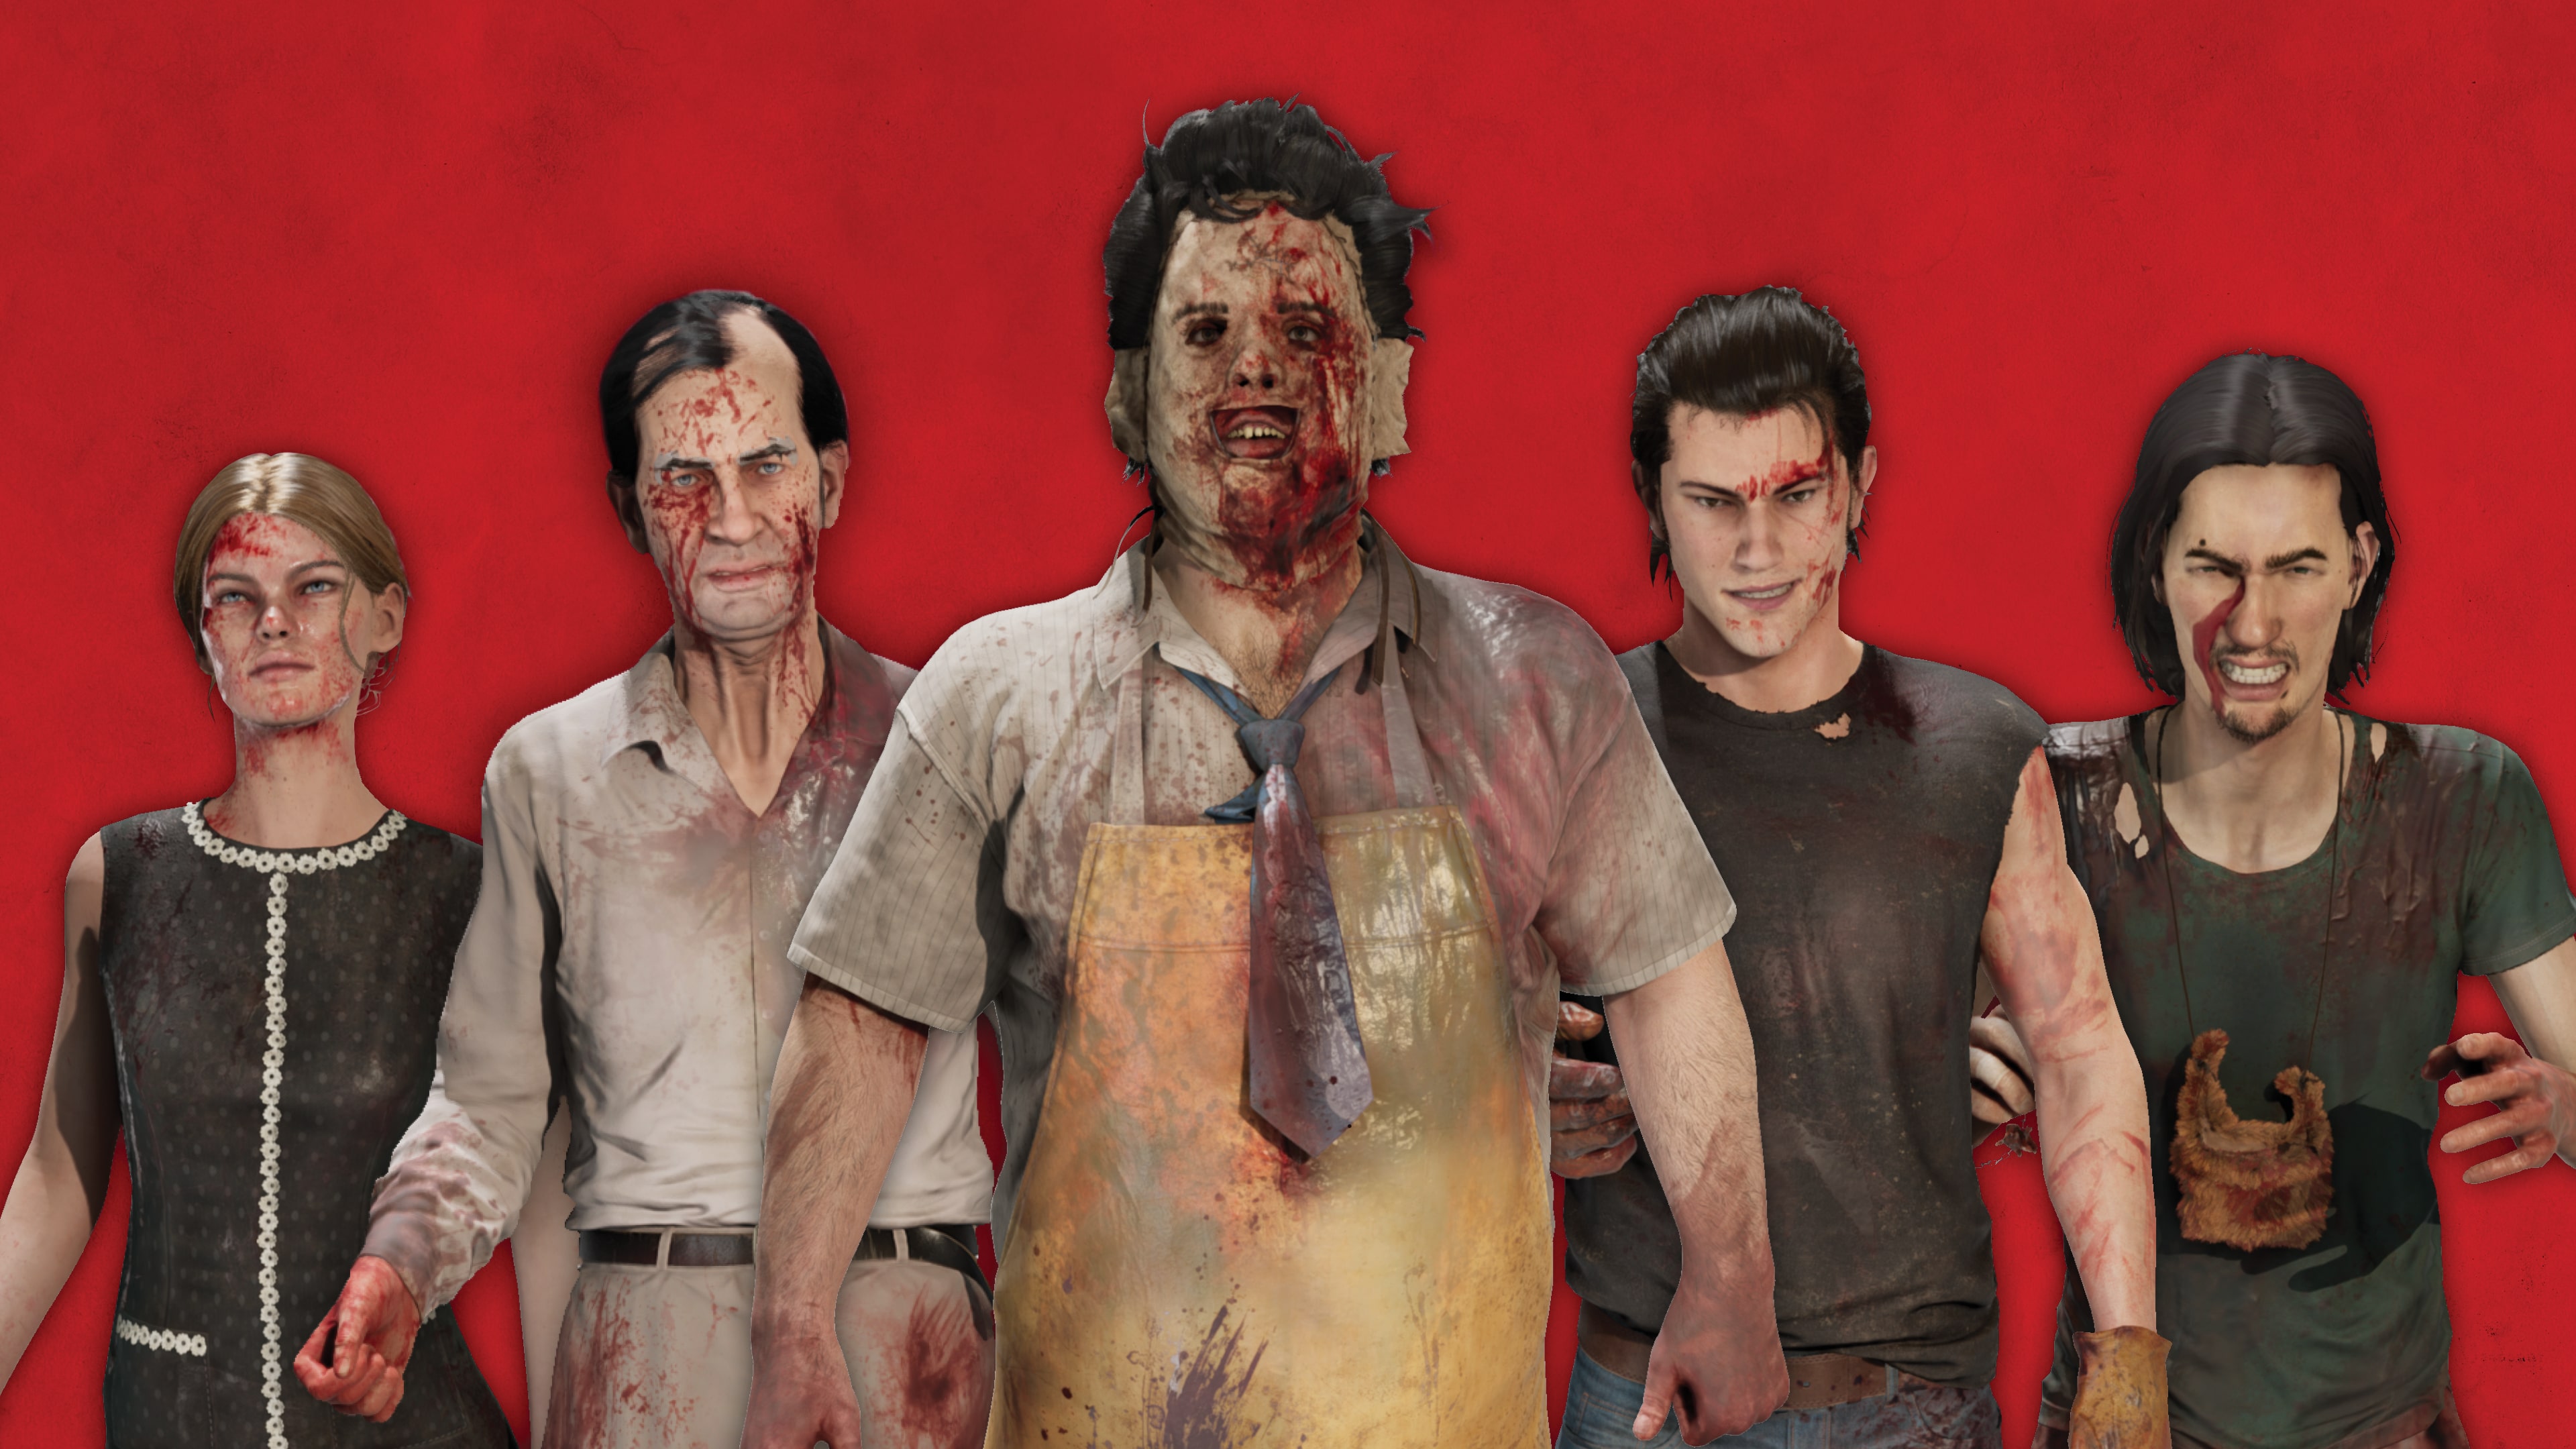 The Texas Chain Saw Massacre - Slaughter Family Bloody Skins Pack